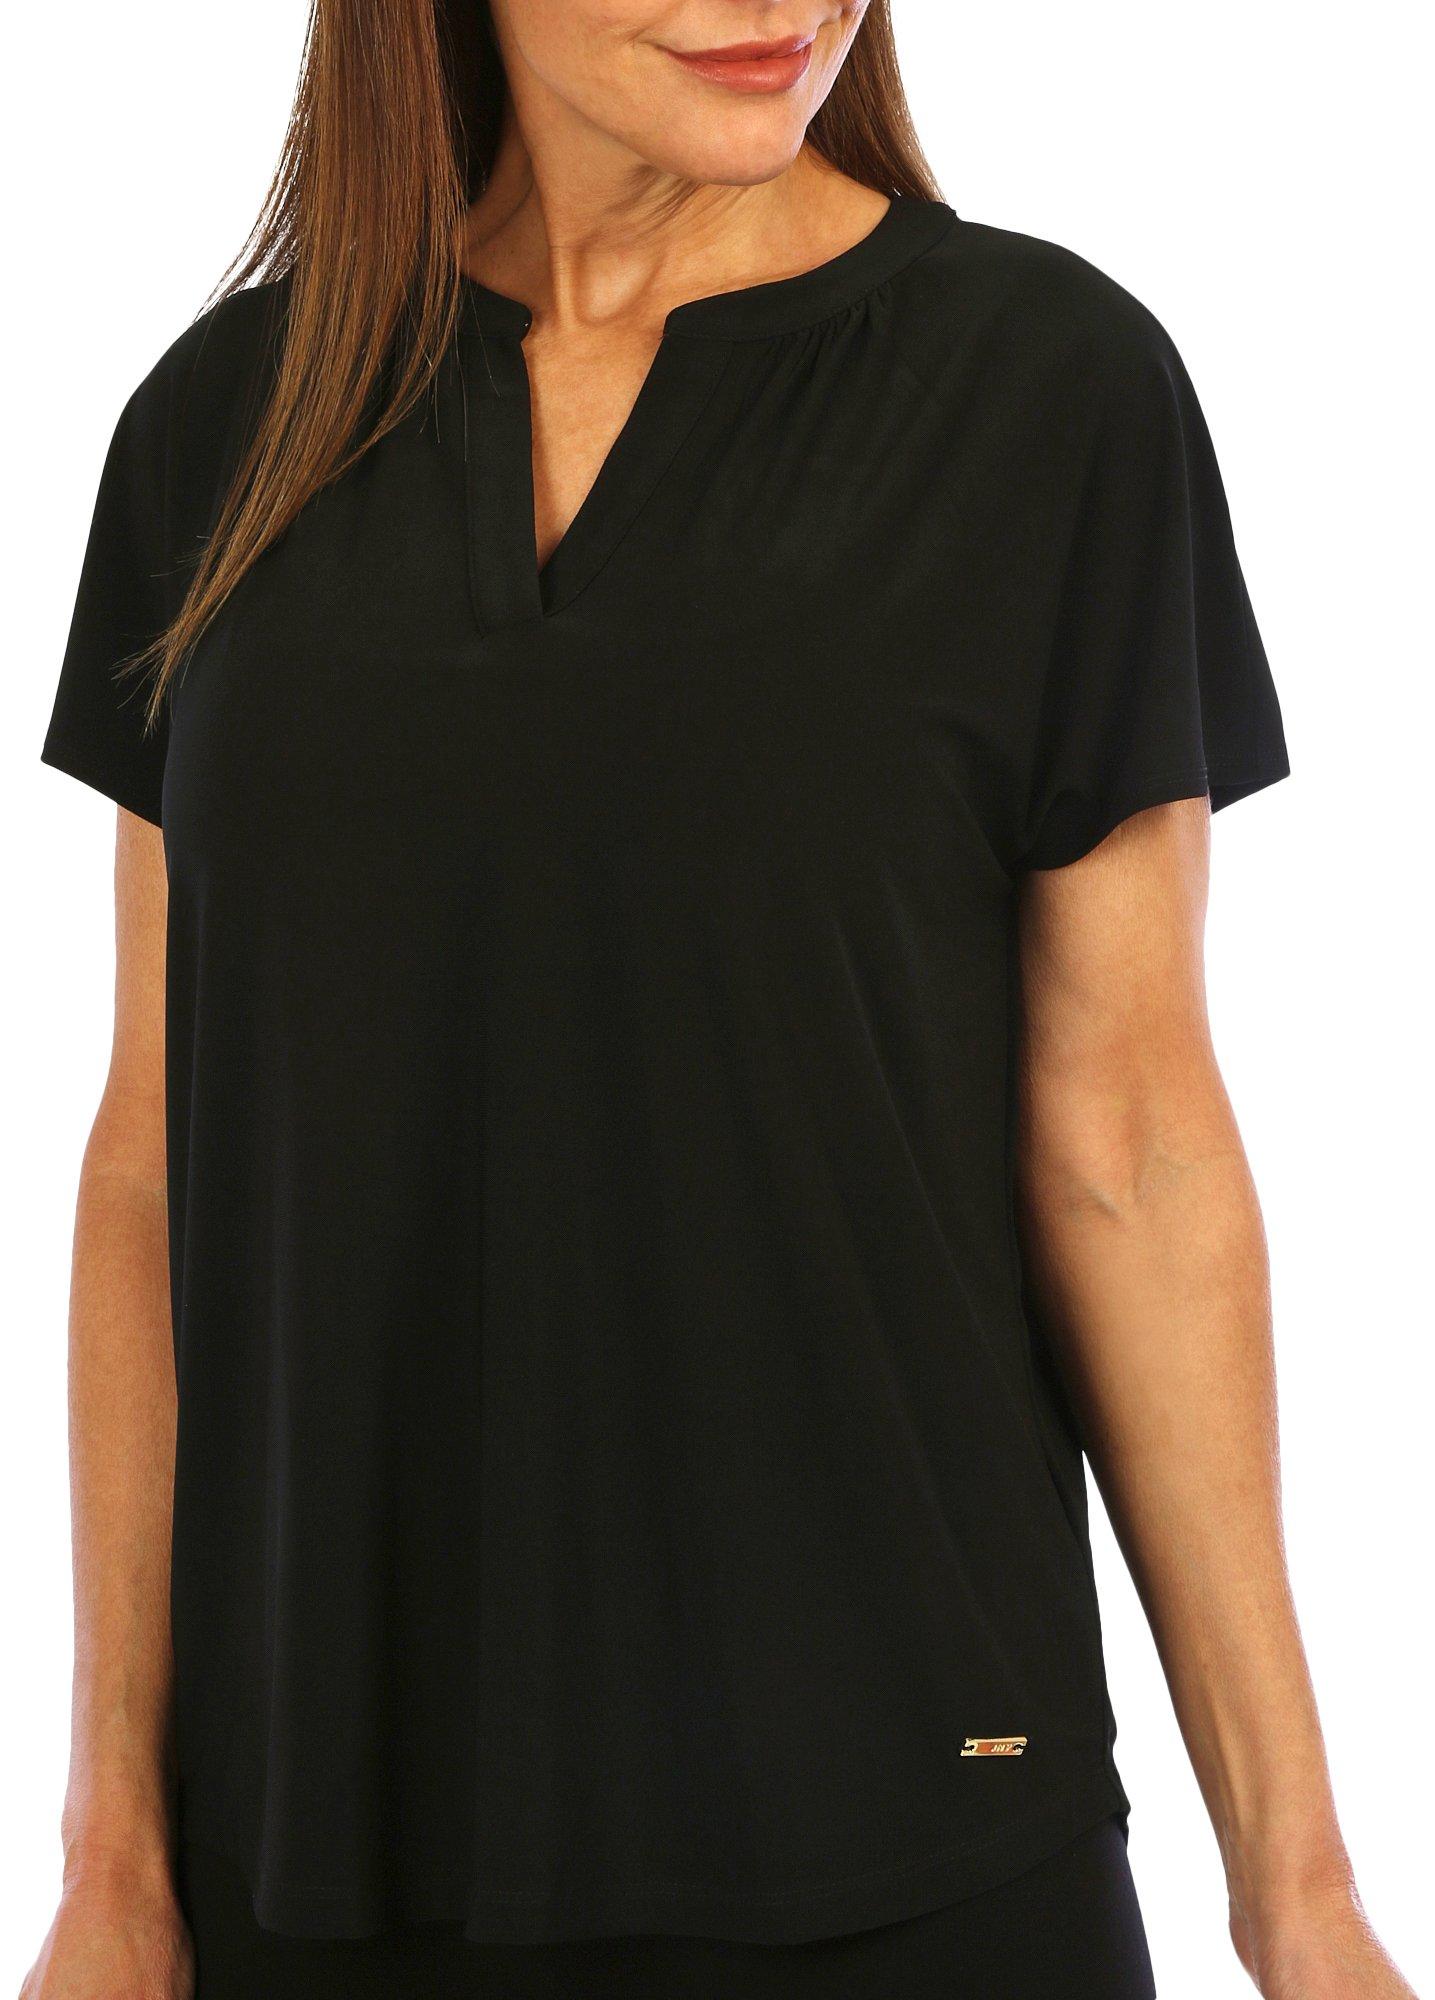 Women's Solid Short Sleeve Blouse